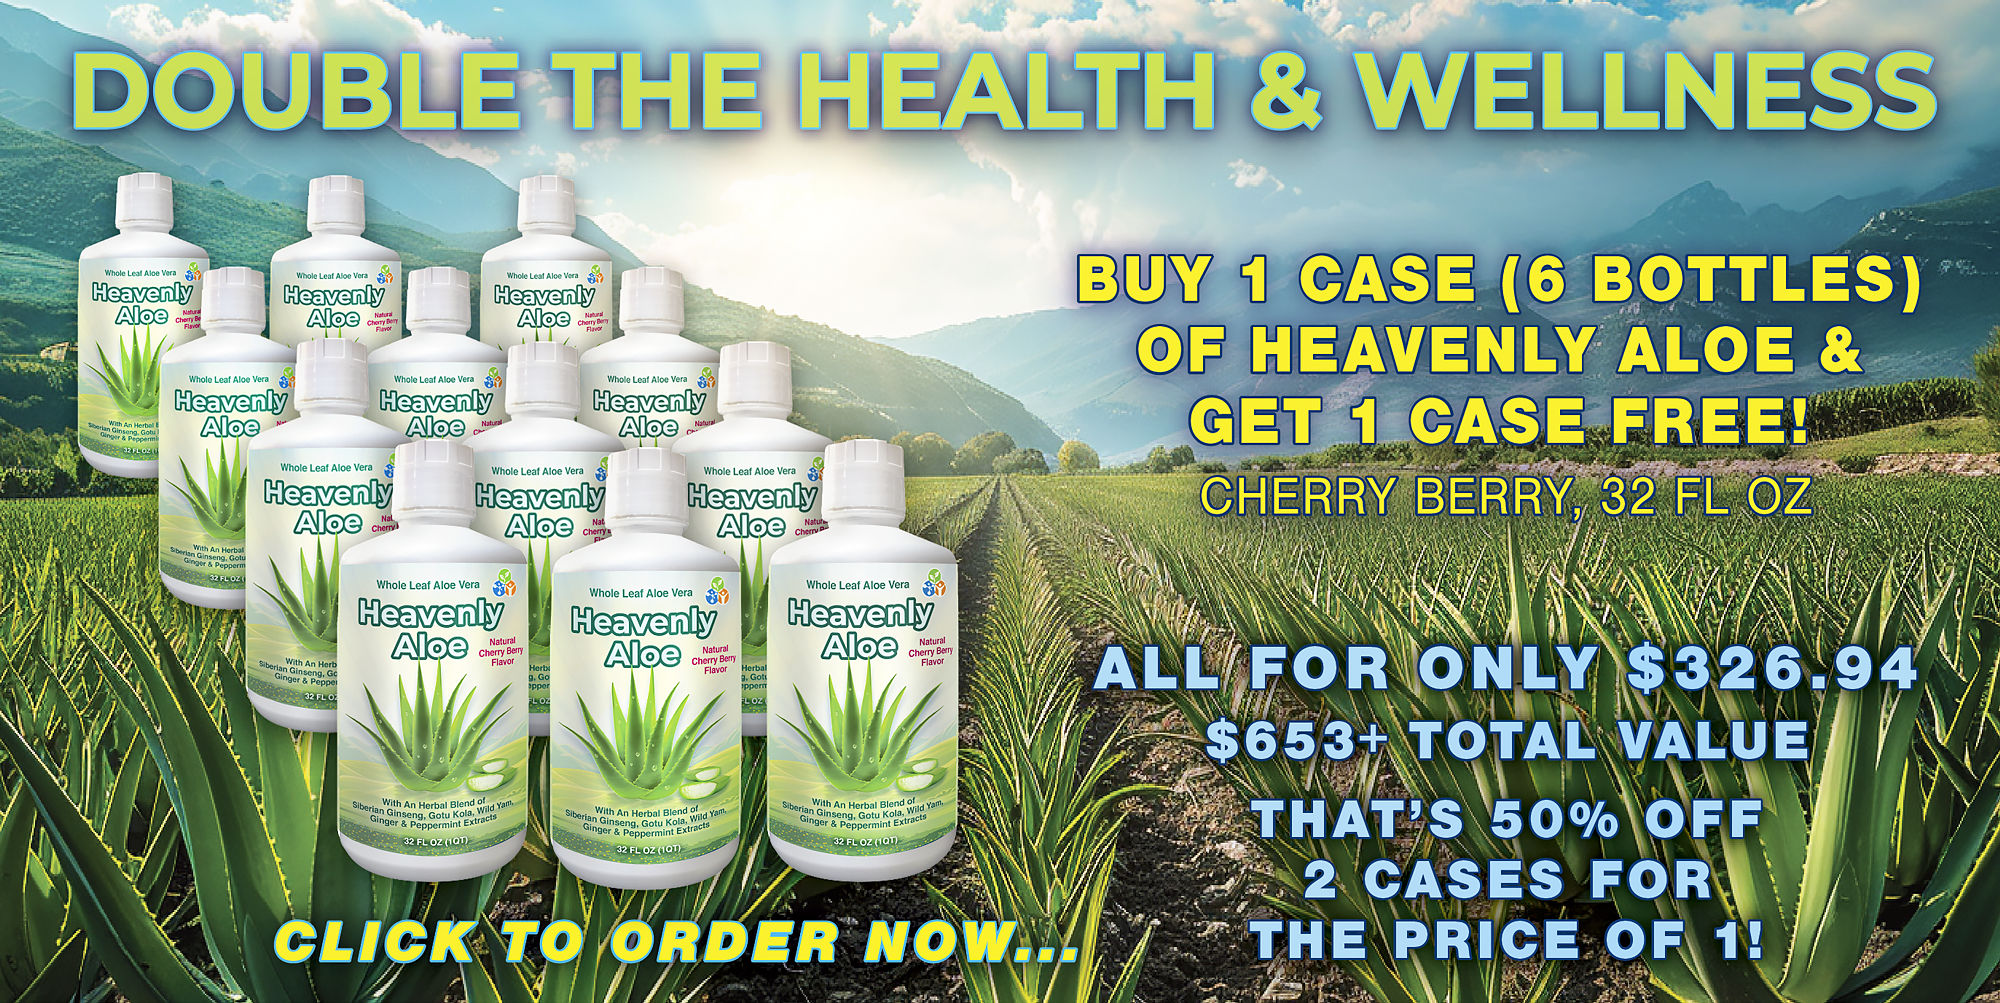 Heavenly Aloe 2 Cases for the Price of 1